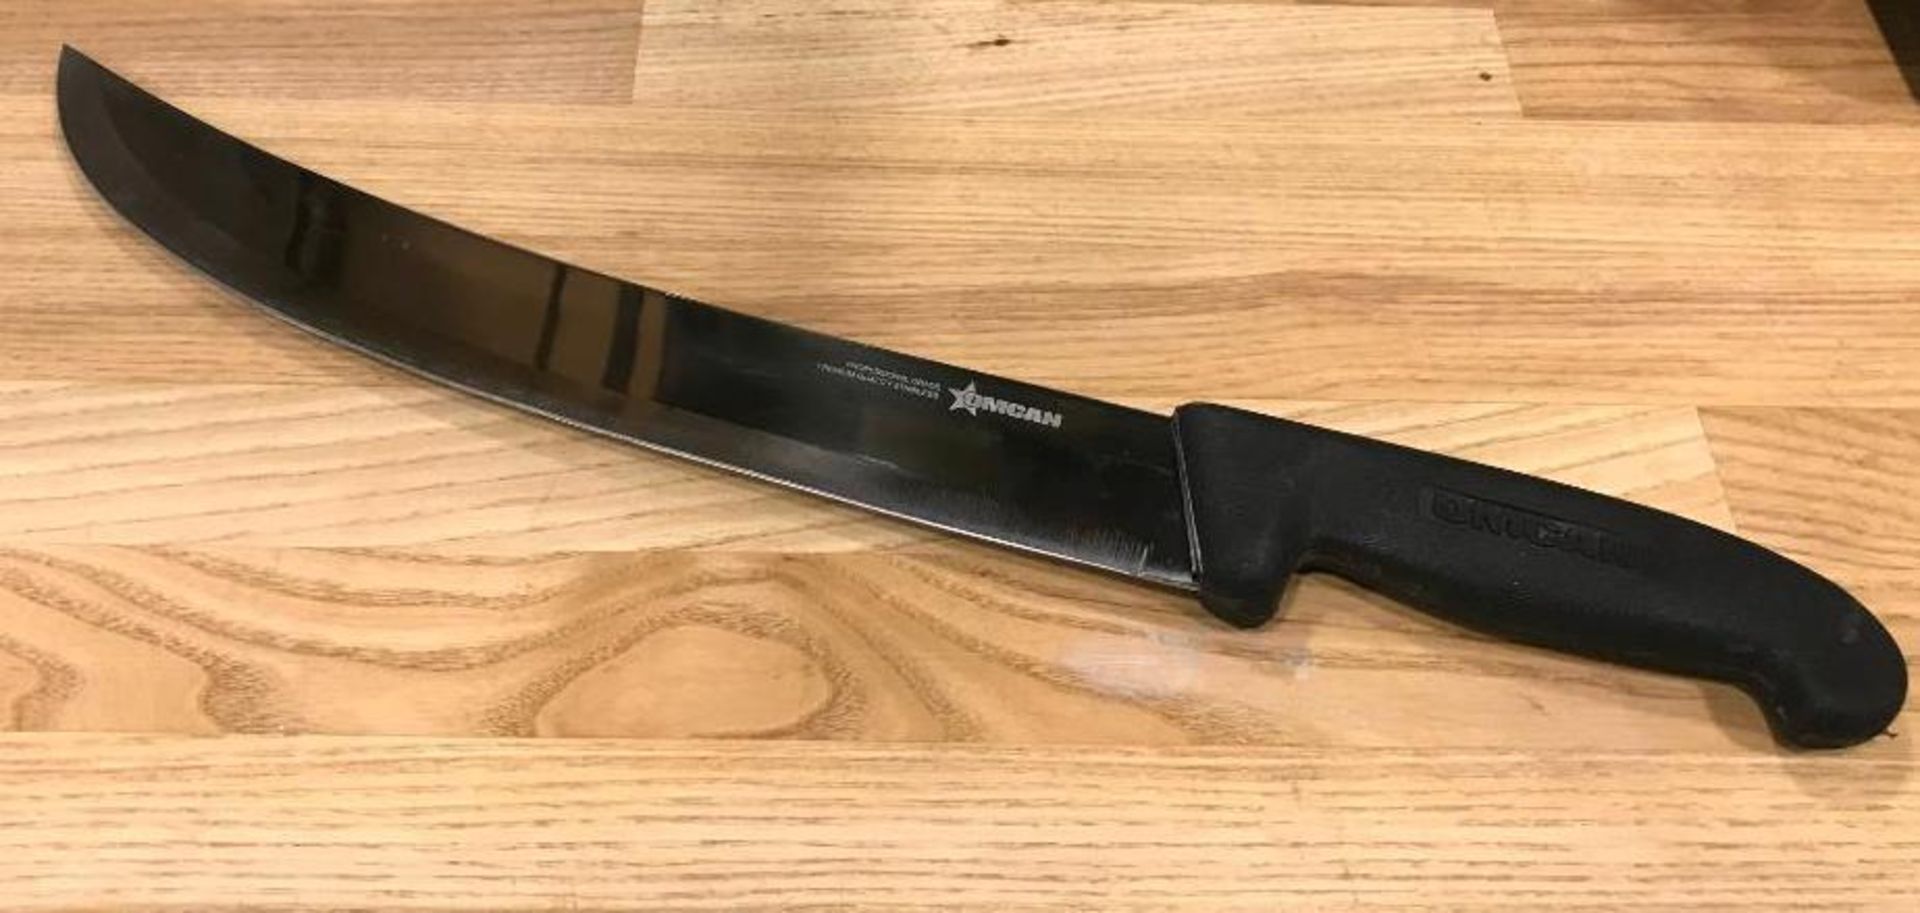 OMCAN 12" STEAK CUTTING KNIFE - POLY HANDLE -OMCAN 12250 - NEW - Image 3 of 3